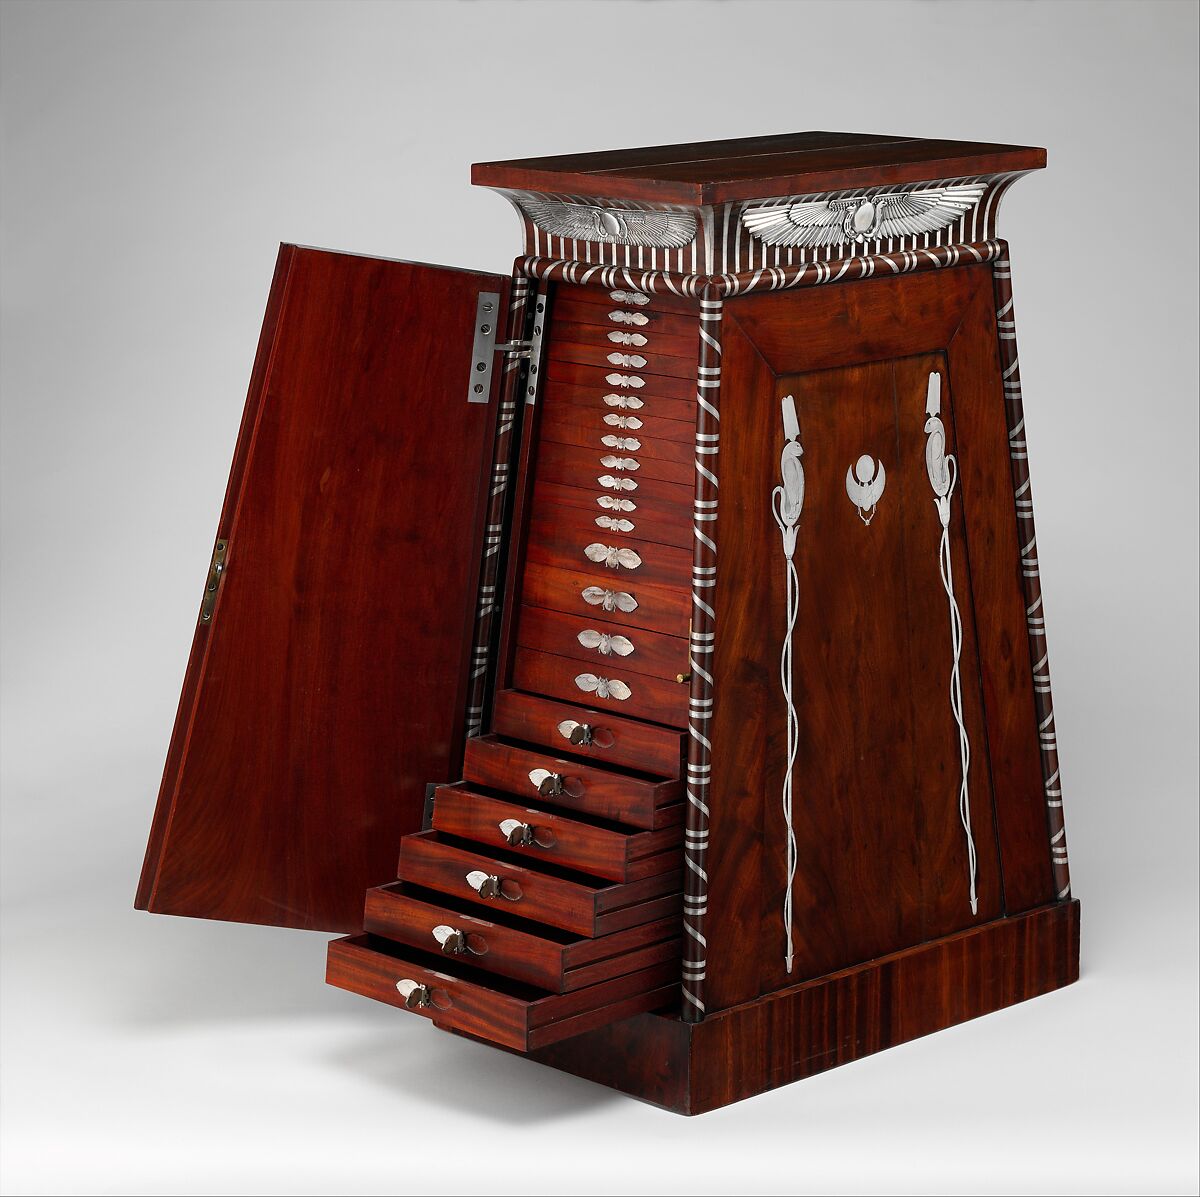 Coin cabinet ca. 1809–19,  Designed by Charles Percier (French, Paris 1764–1838 Paris), Mahogany (probably Swietenia mahagoni), applied and inlaid silver, French, Paris